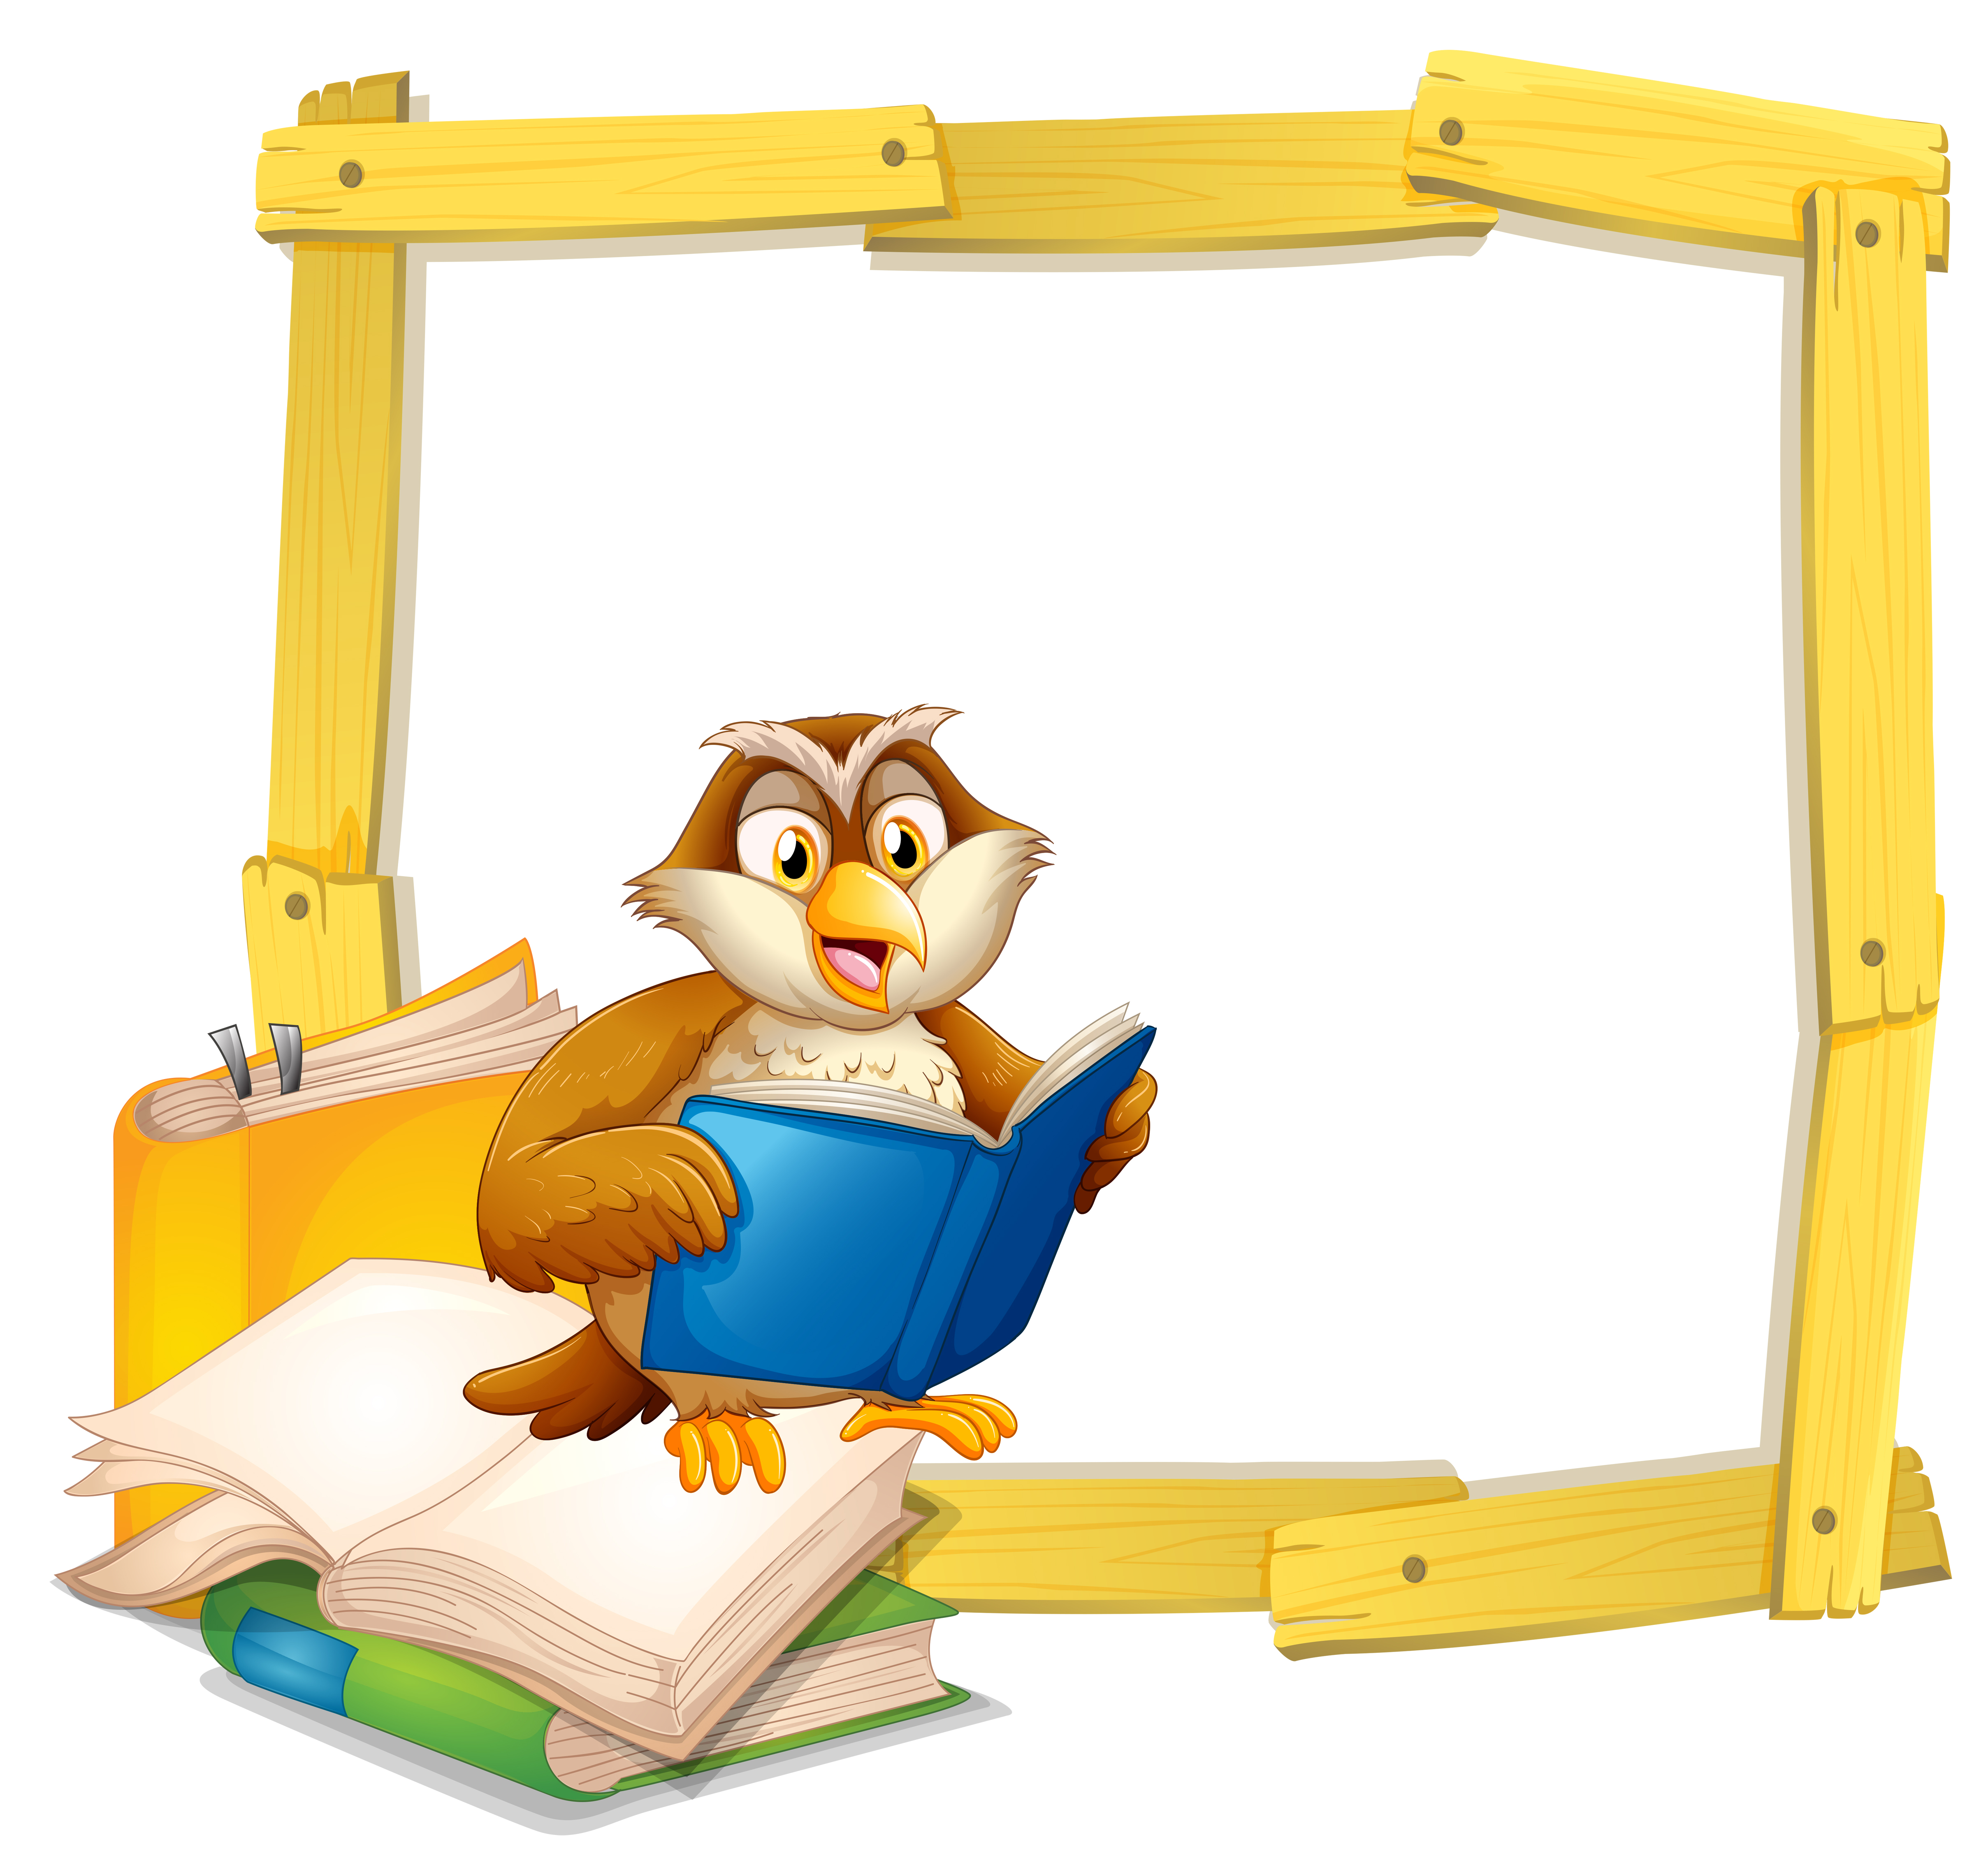 An Owl Reading Book Template - Download Free Vectors ...